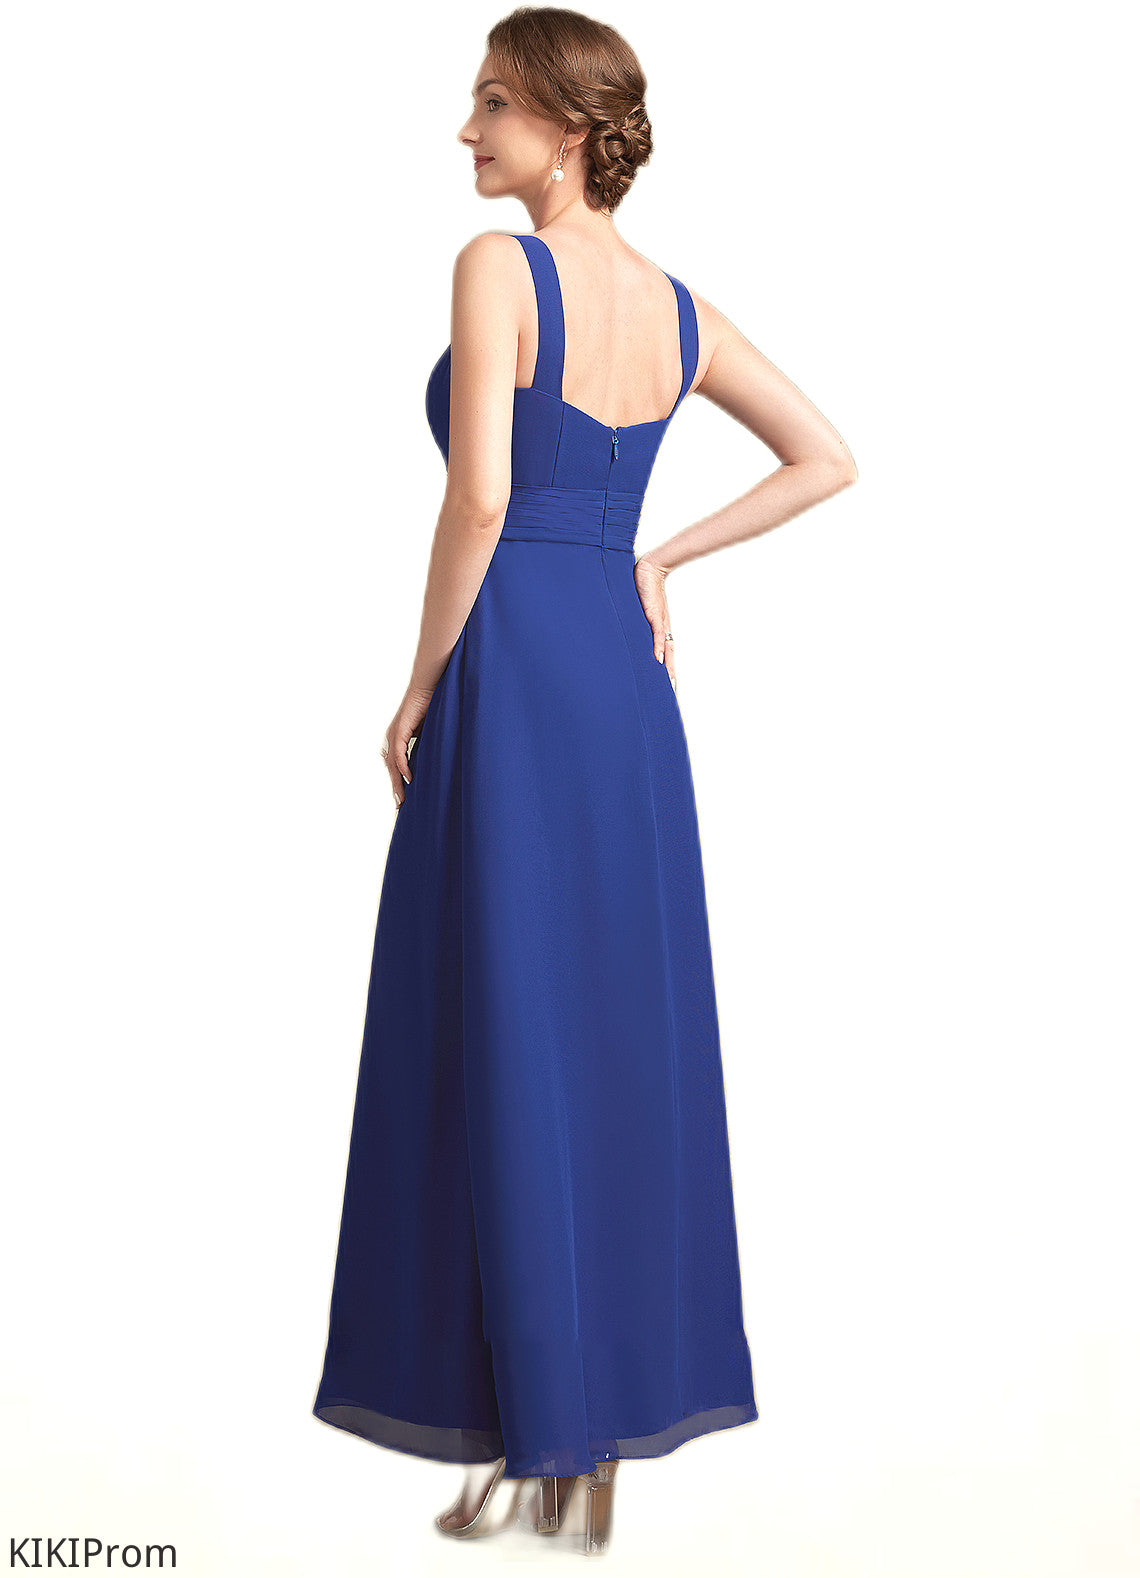 Serenity A-Line Square Neckline Ankle-Length Chiffon Mother of the Bride Dress With Ruffle DZ126P0014982